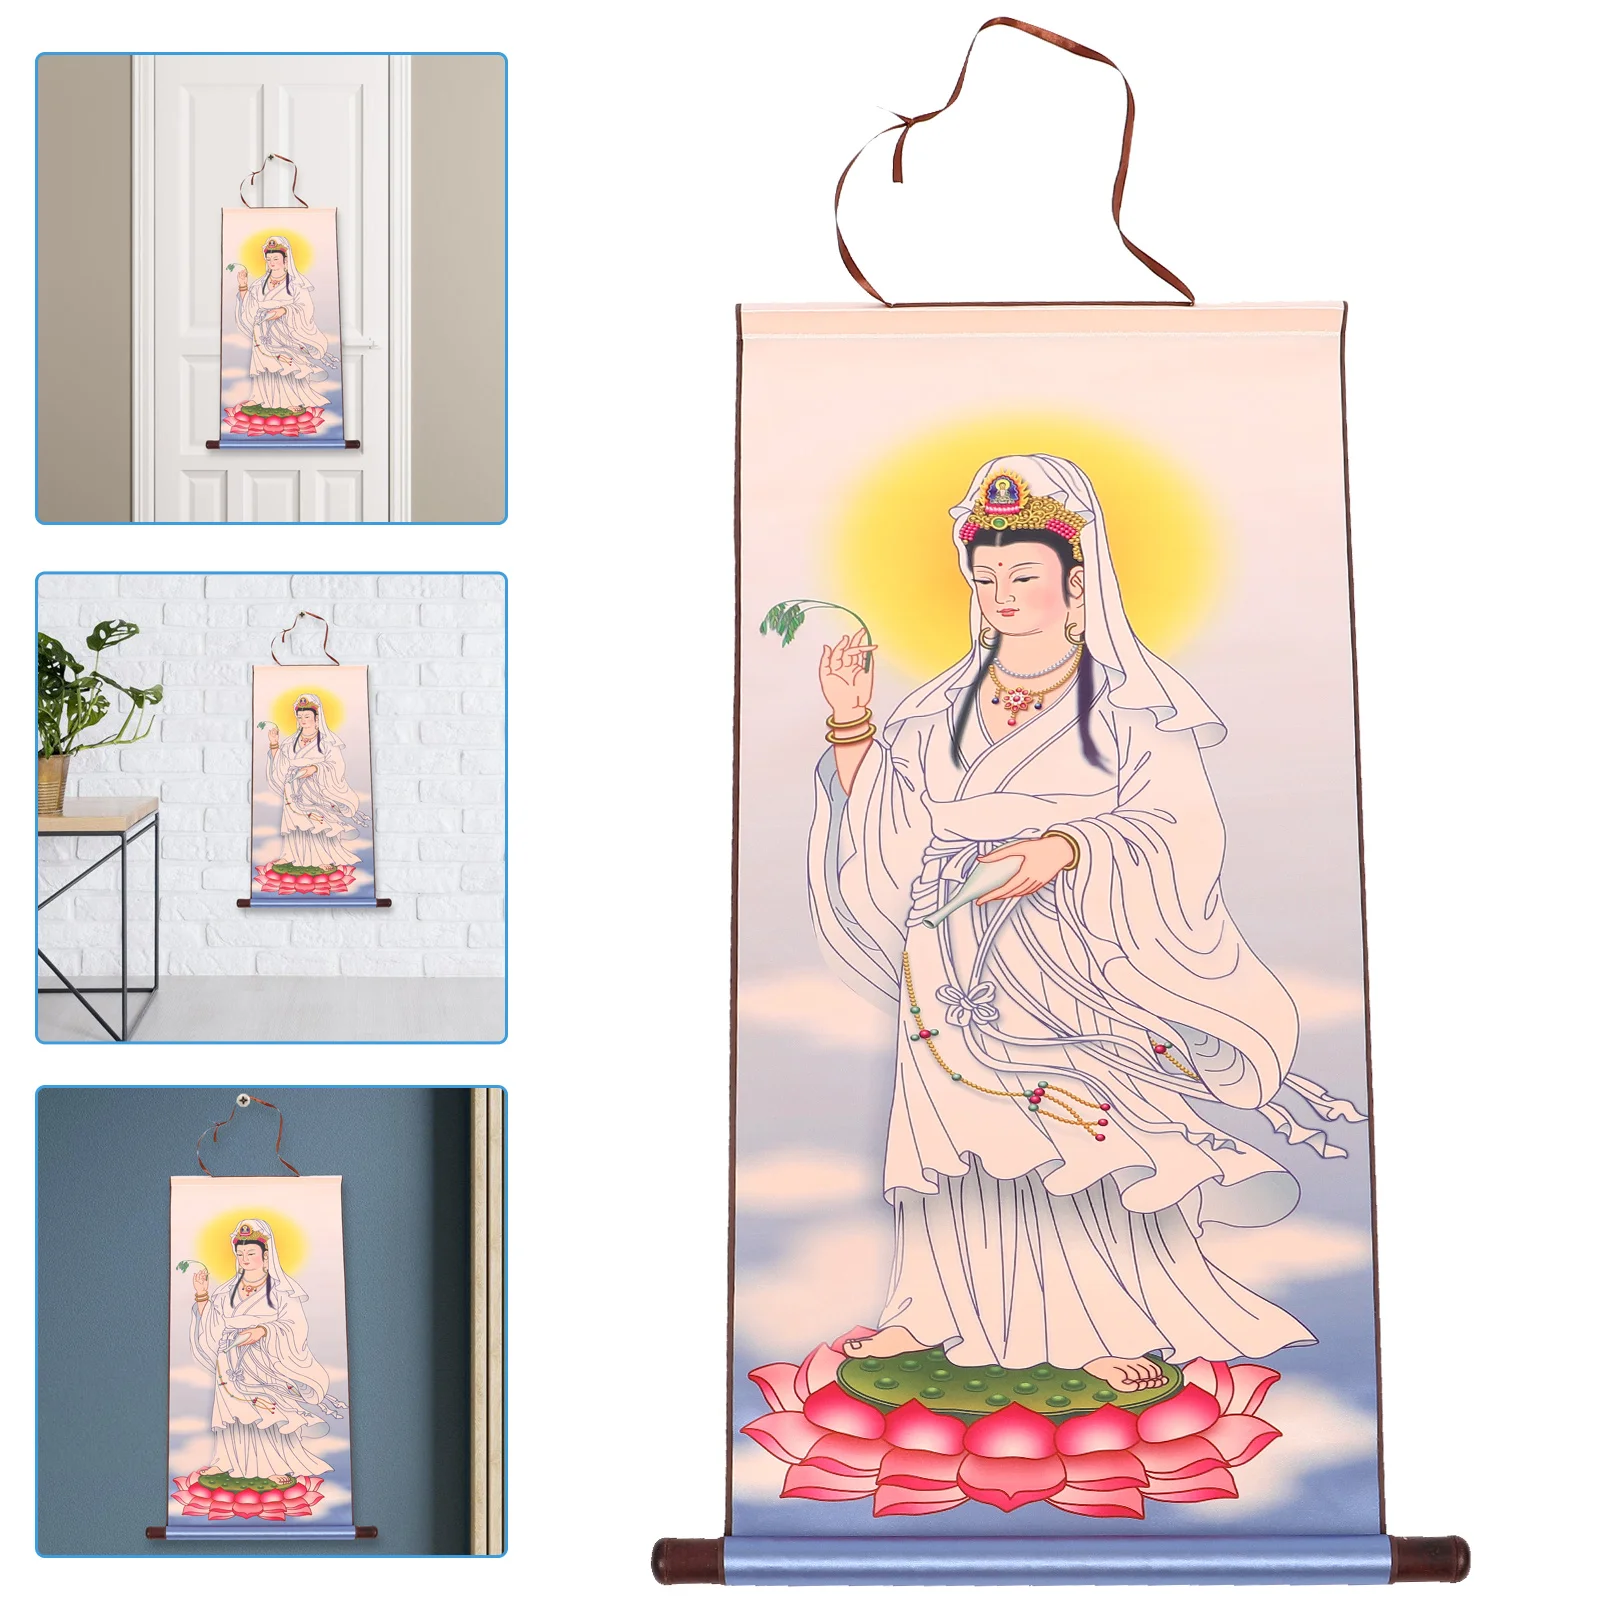 

Wall Art Wall Hanging Scroll Decor Religious Ornament Background Decor Buddha Statues Hanging Paintings Home Offerings And Decor